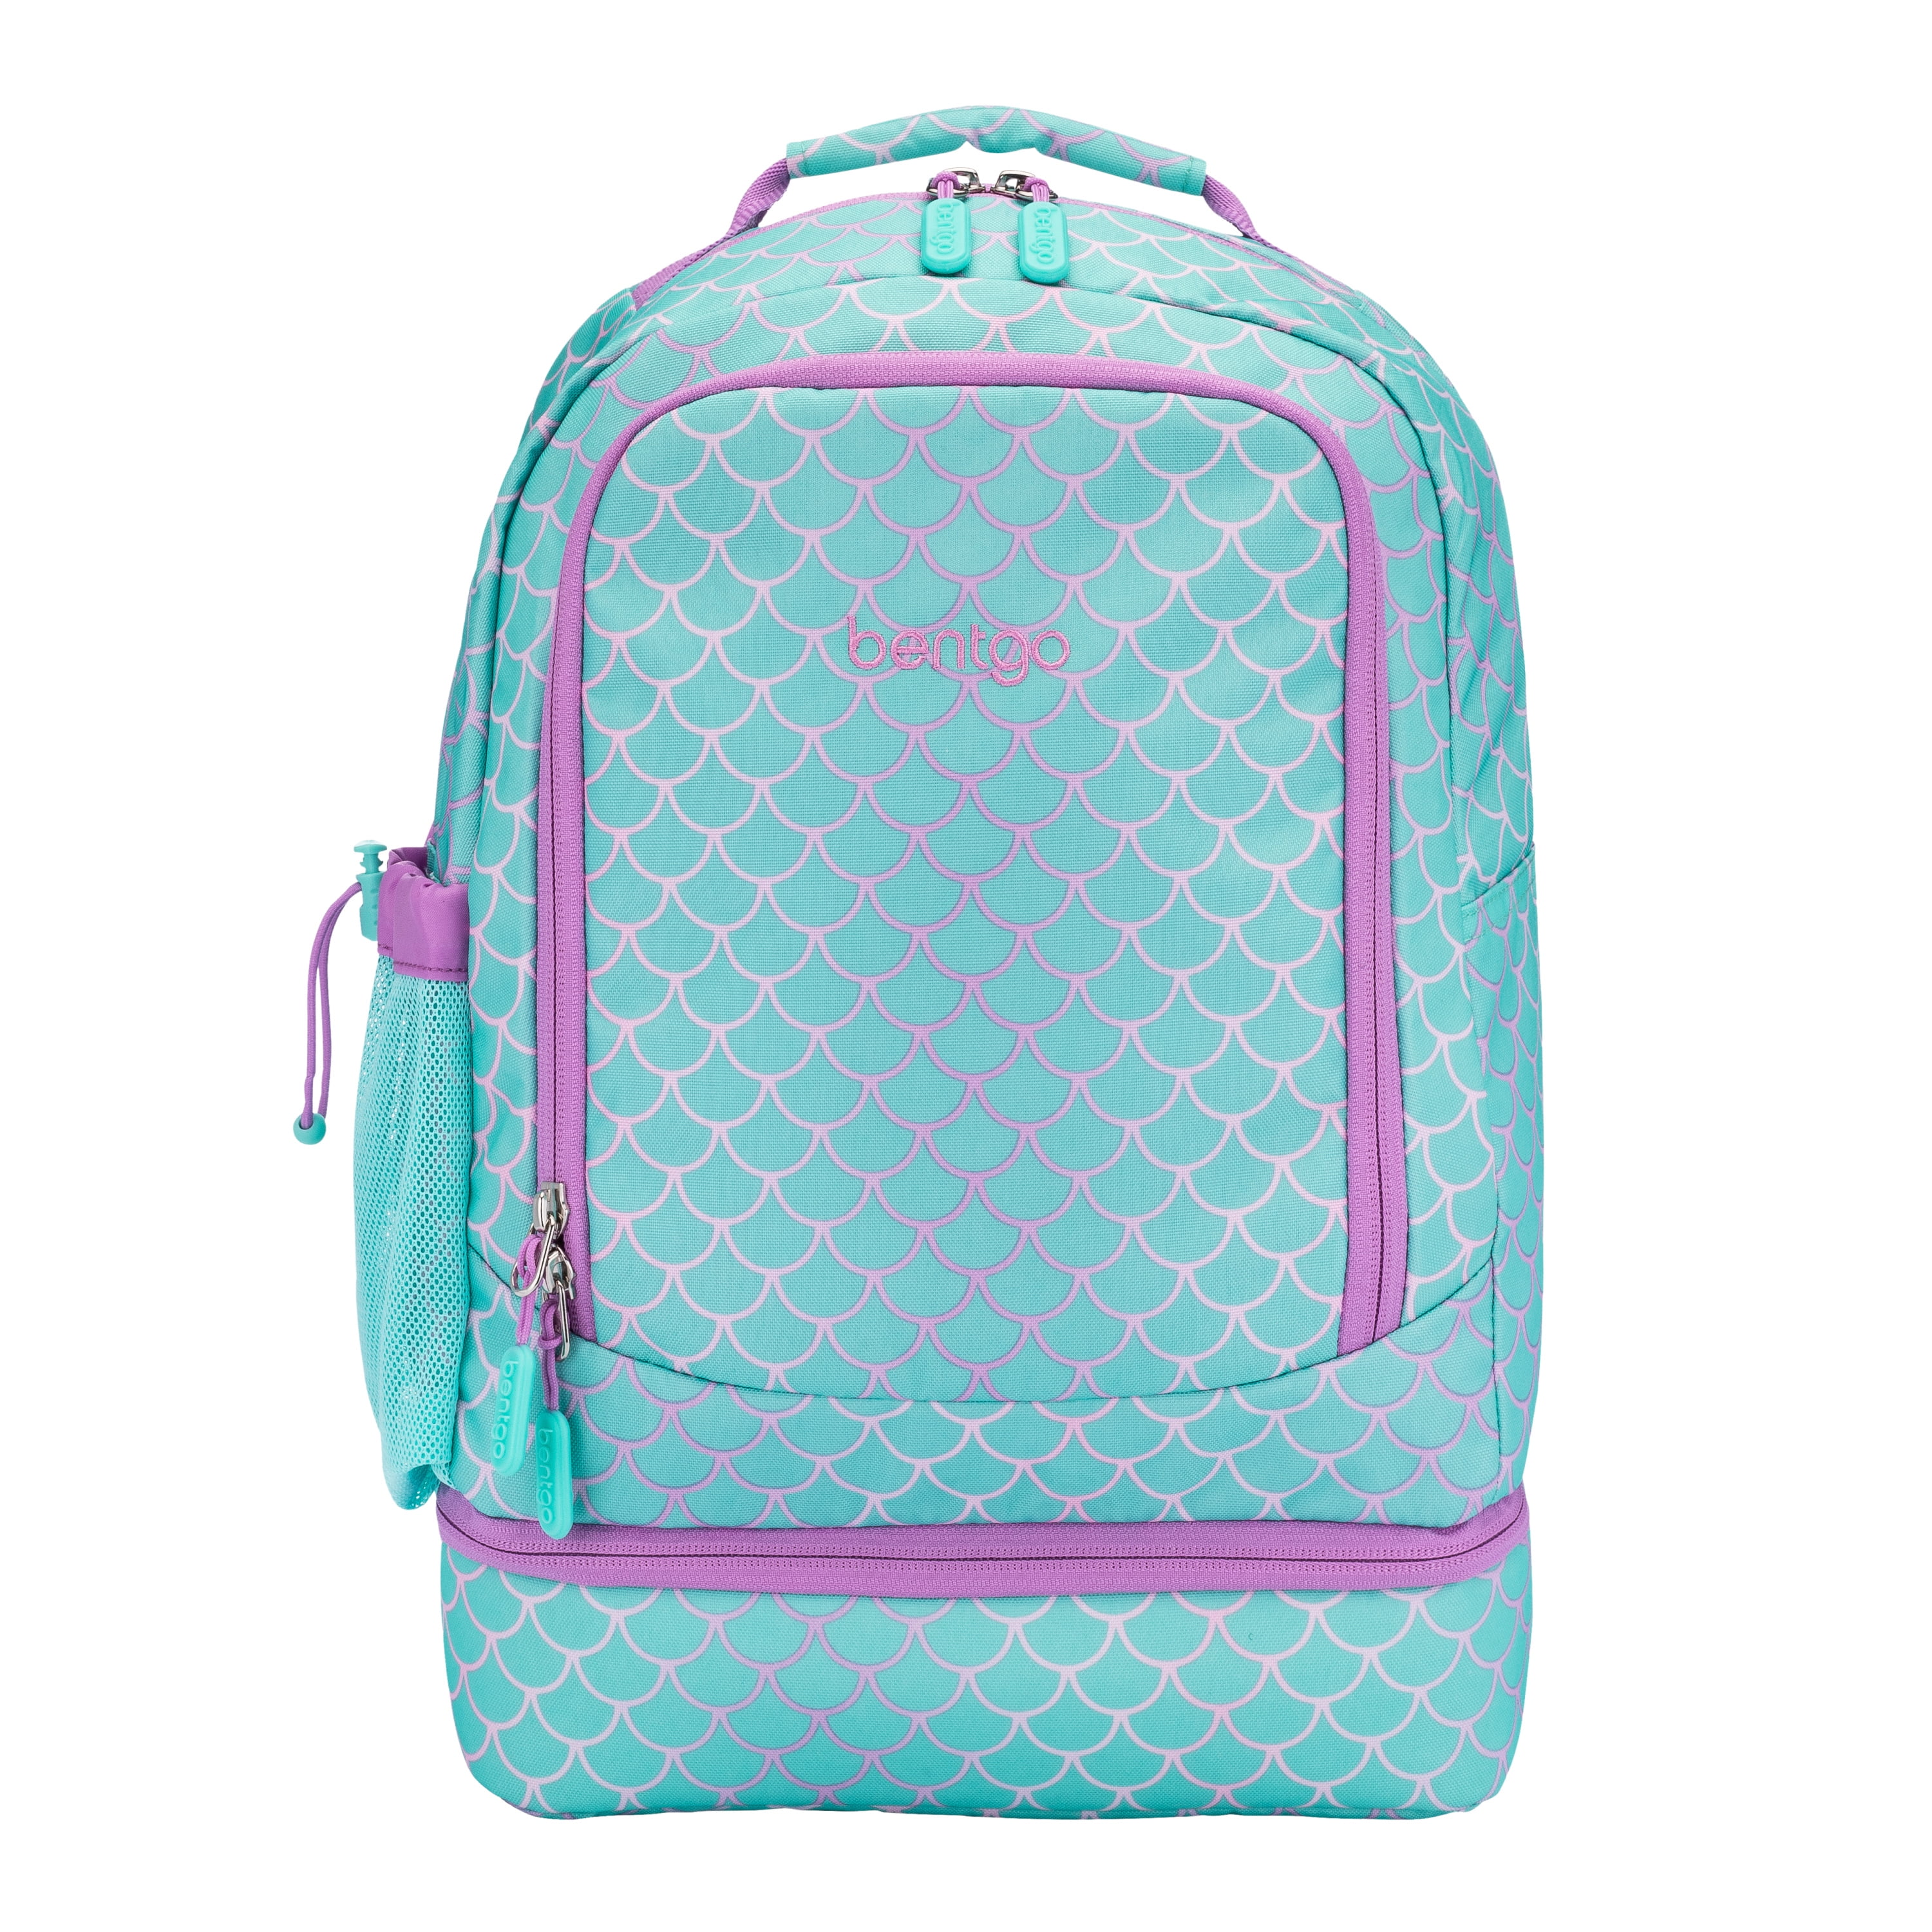  Bentgo® Kids 2-in-1 Backpack & Insulated Lunch Bag - Glitter  Designed 16” Backpack for School & Travel - Durable, Water Resistant,  Padded, & Large Compartments (Glitter Edition - Petal Pink)